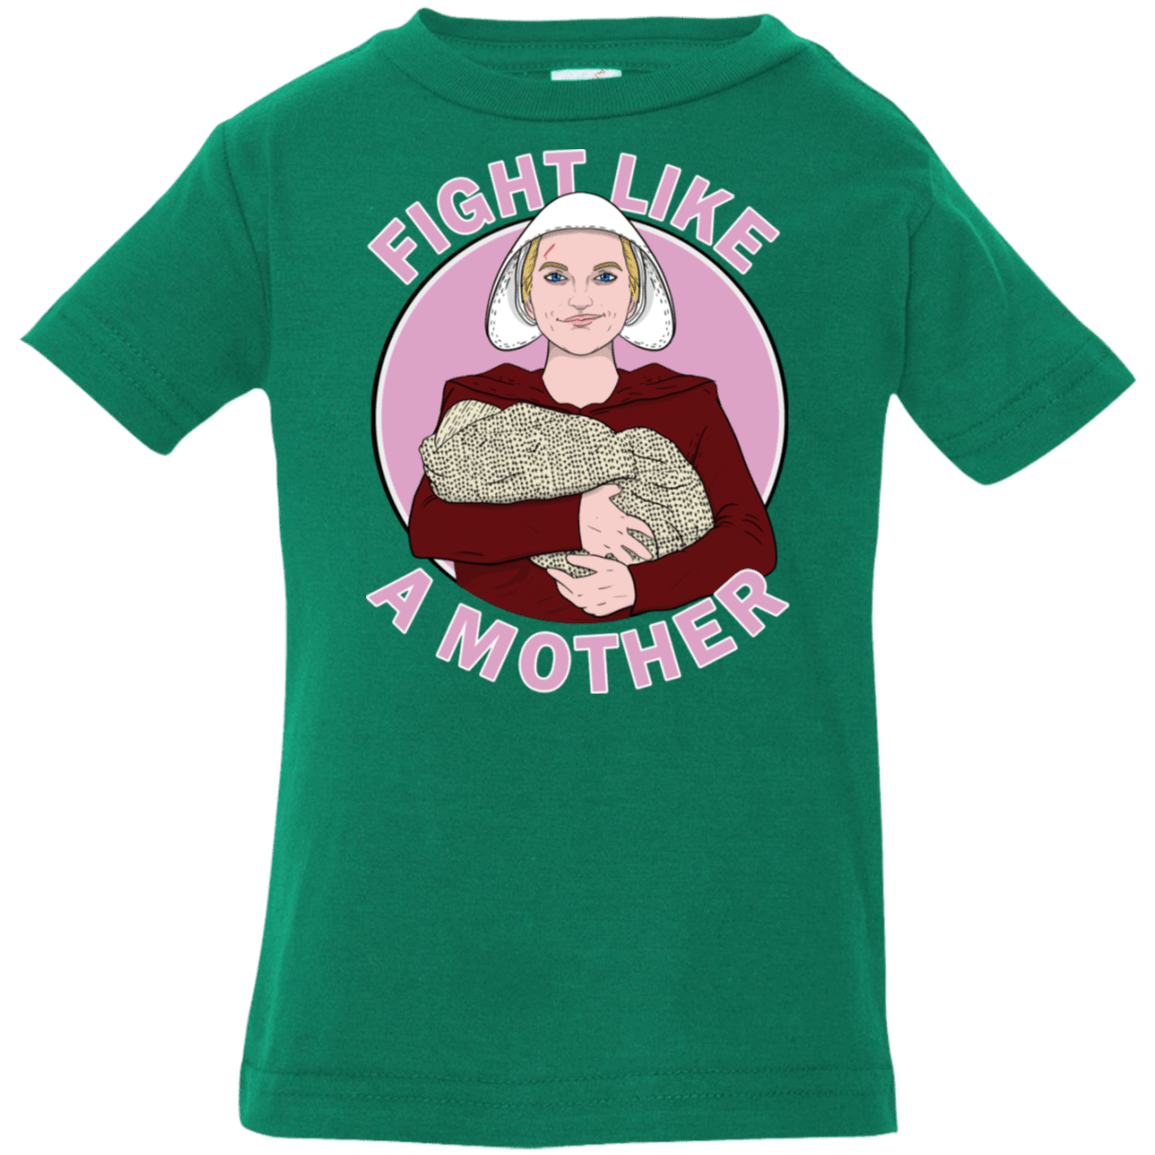 T-Shirts Kelly / 6 Months Fight Like a Mother Infant Premium T-Shirt